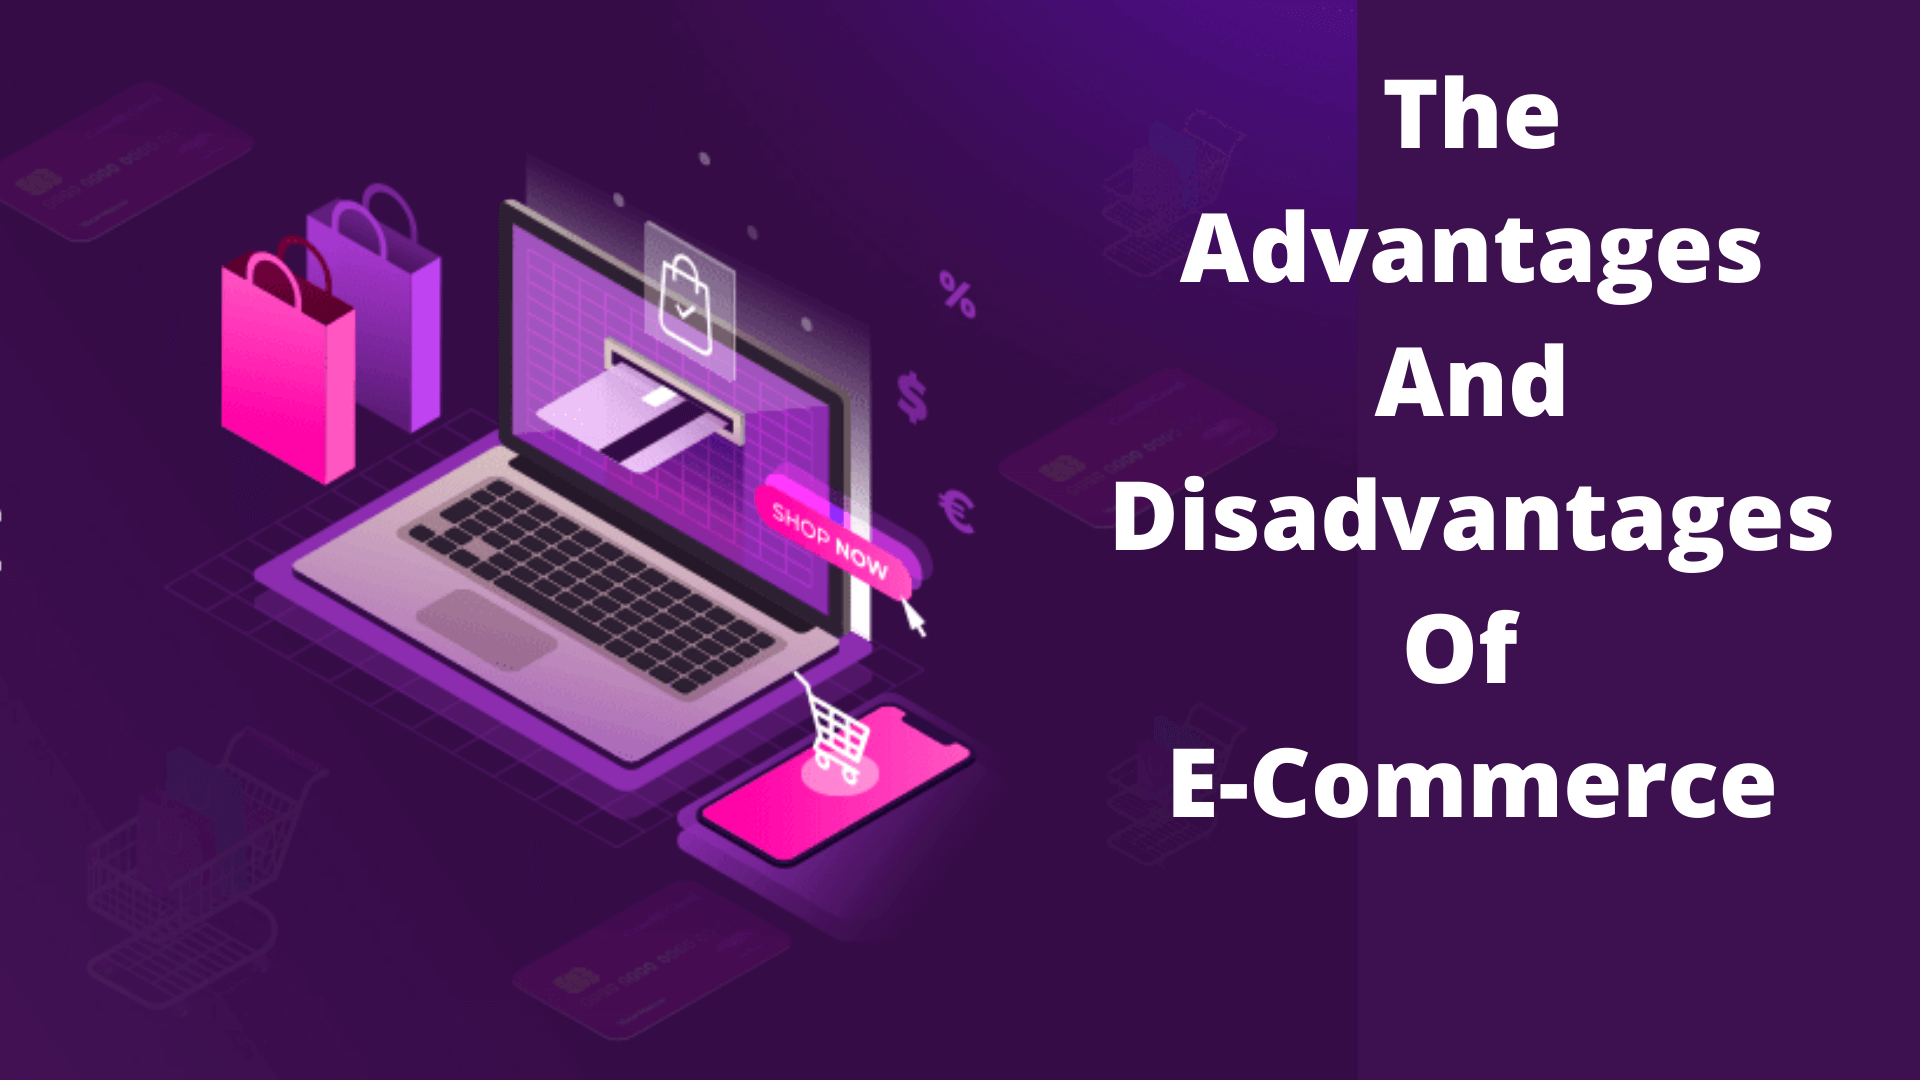 The Advantages And Disadvantages Of E-Commerce (2) (1)